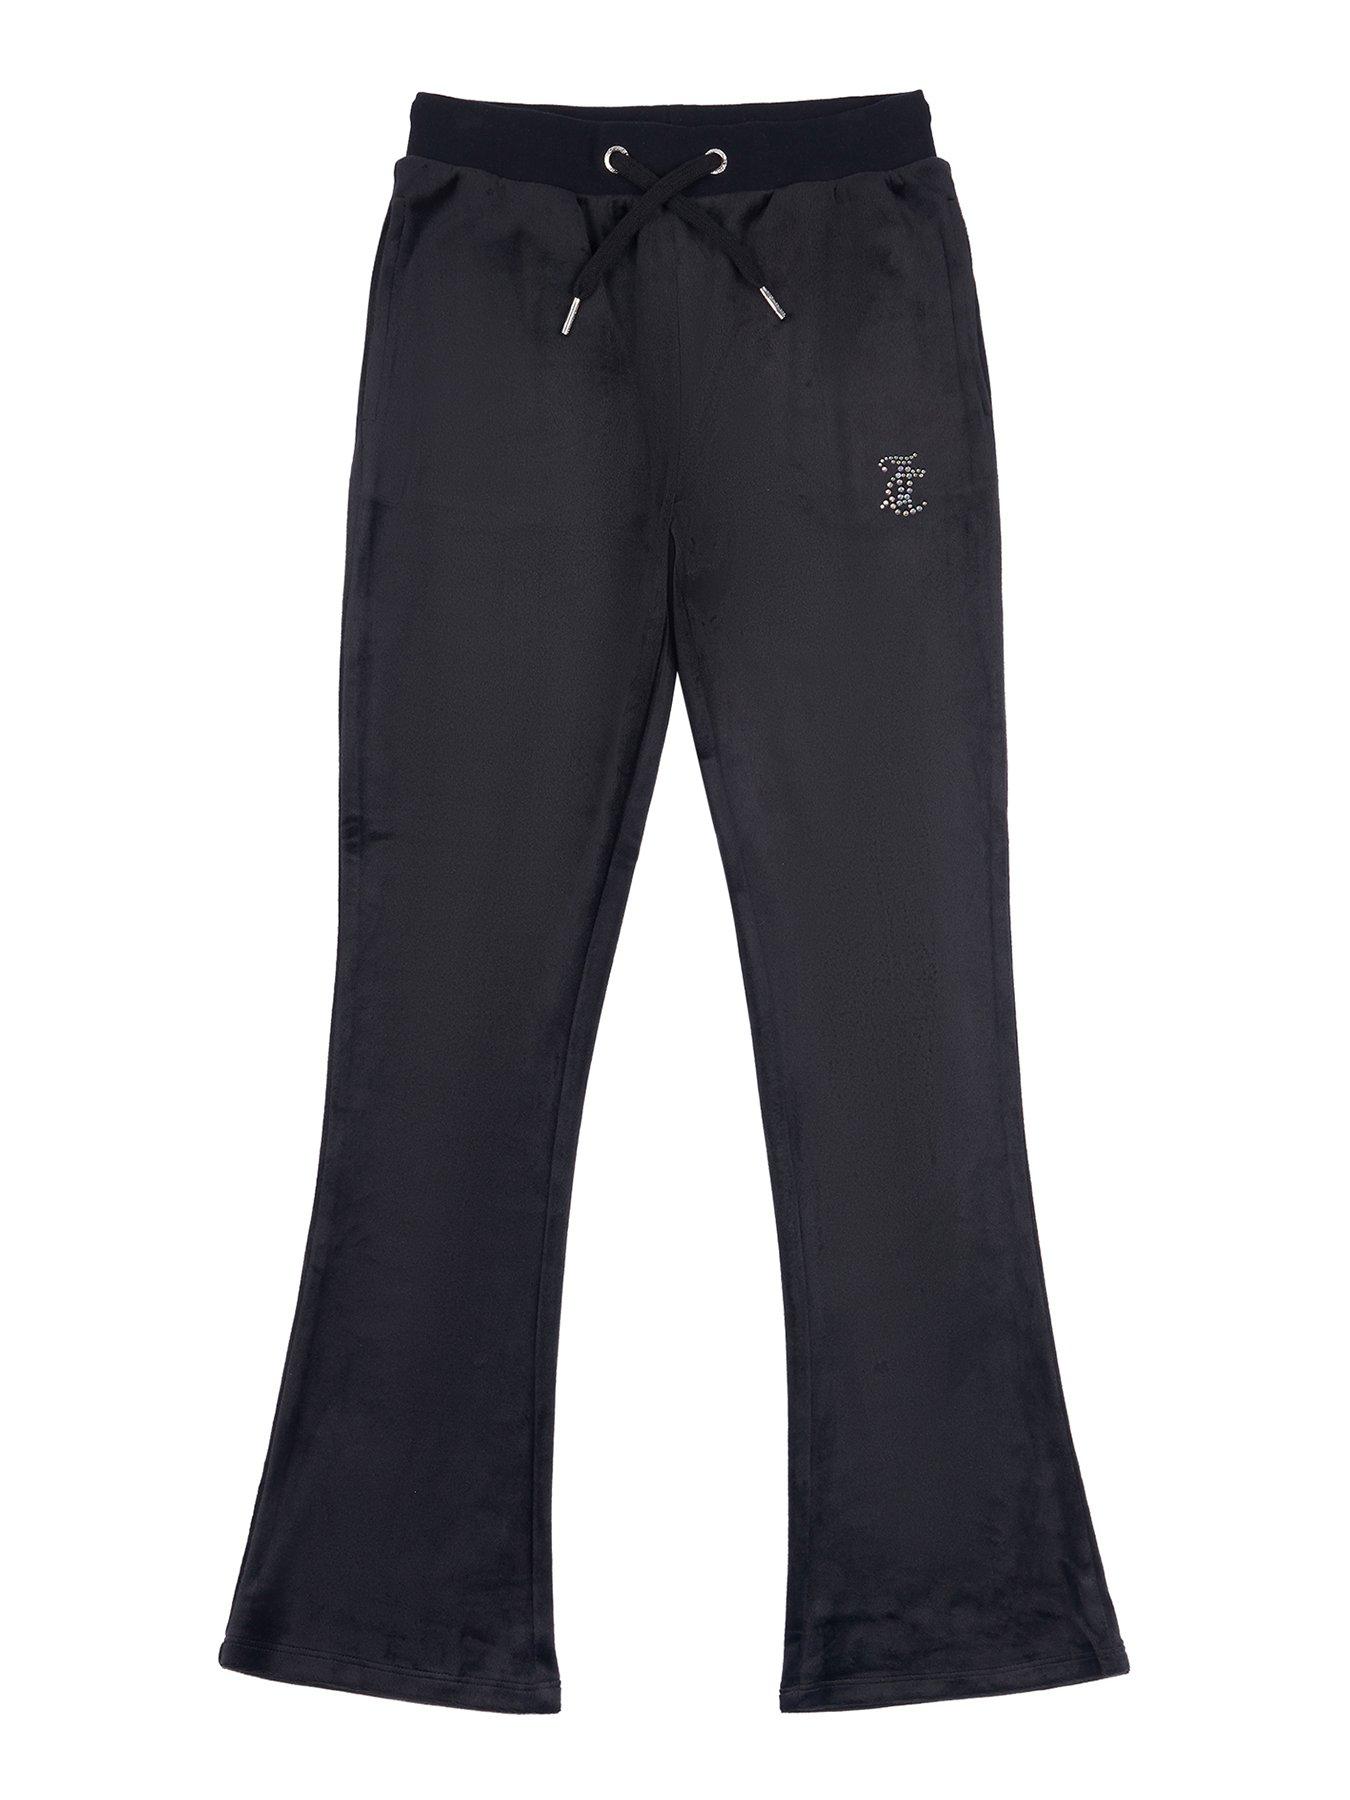 Juicy Couture Kids blue Velour Bootcut Sweatpants (7-16 Years)